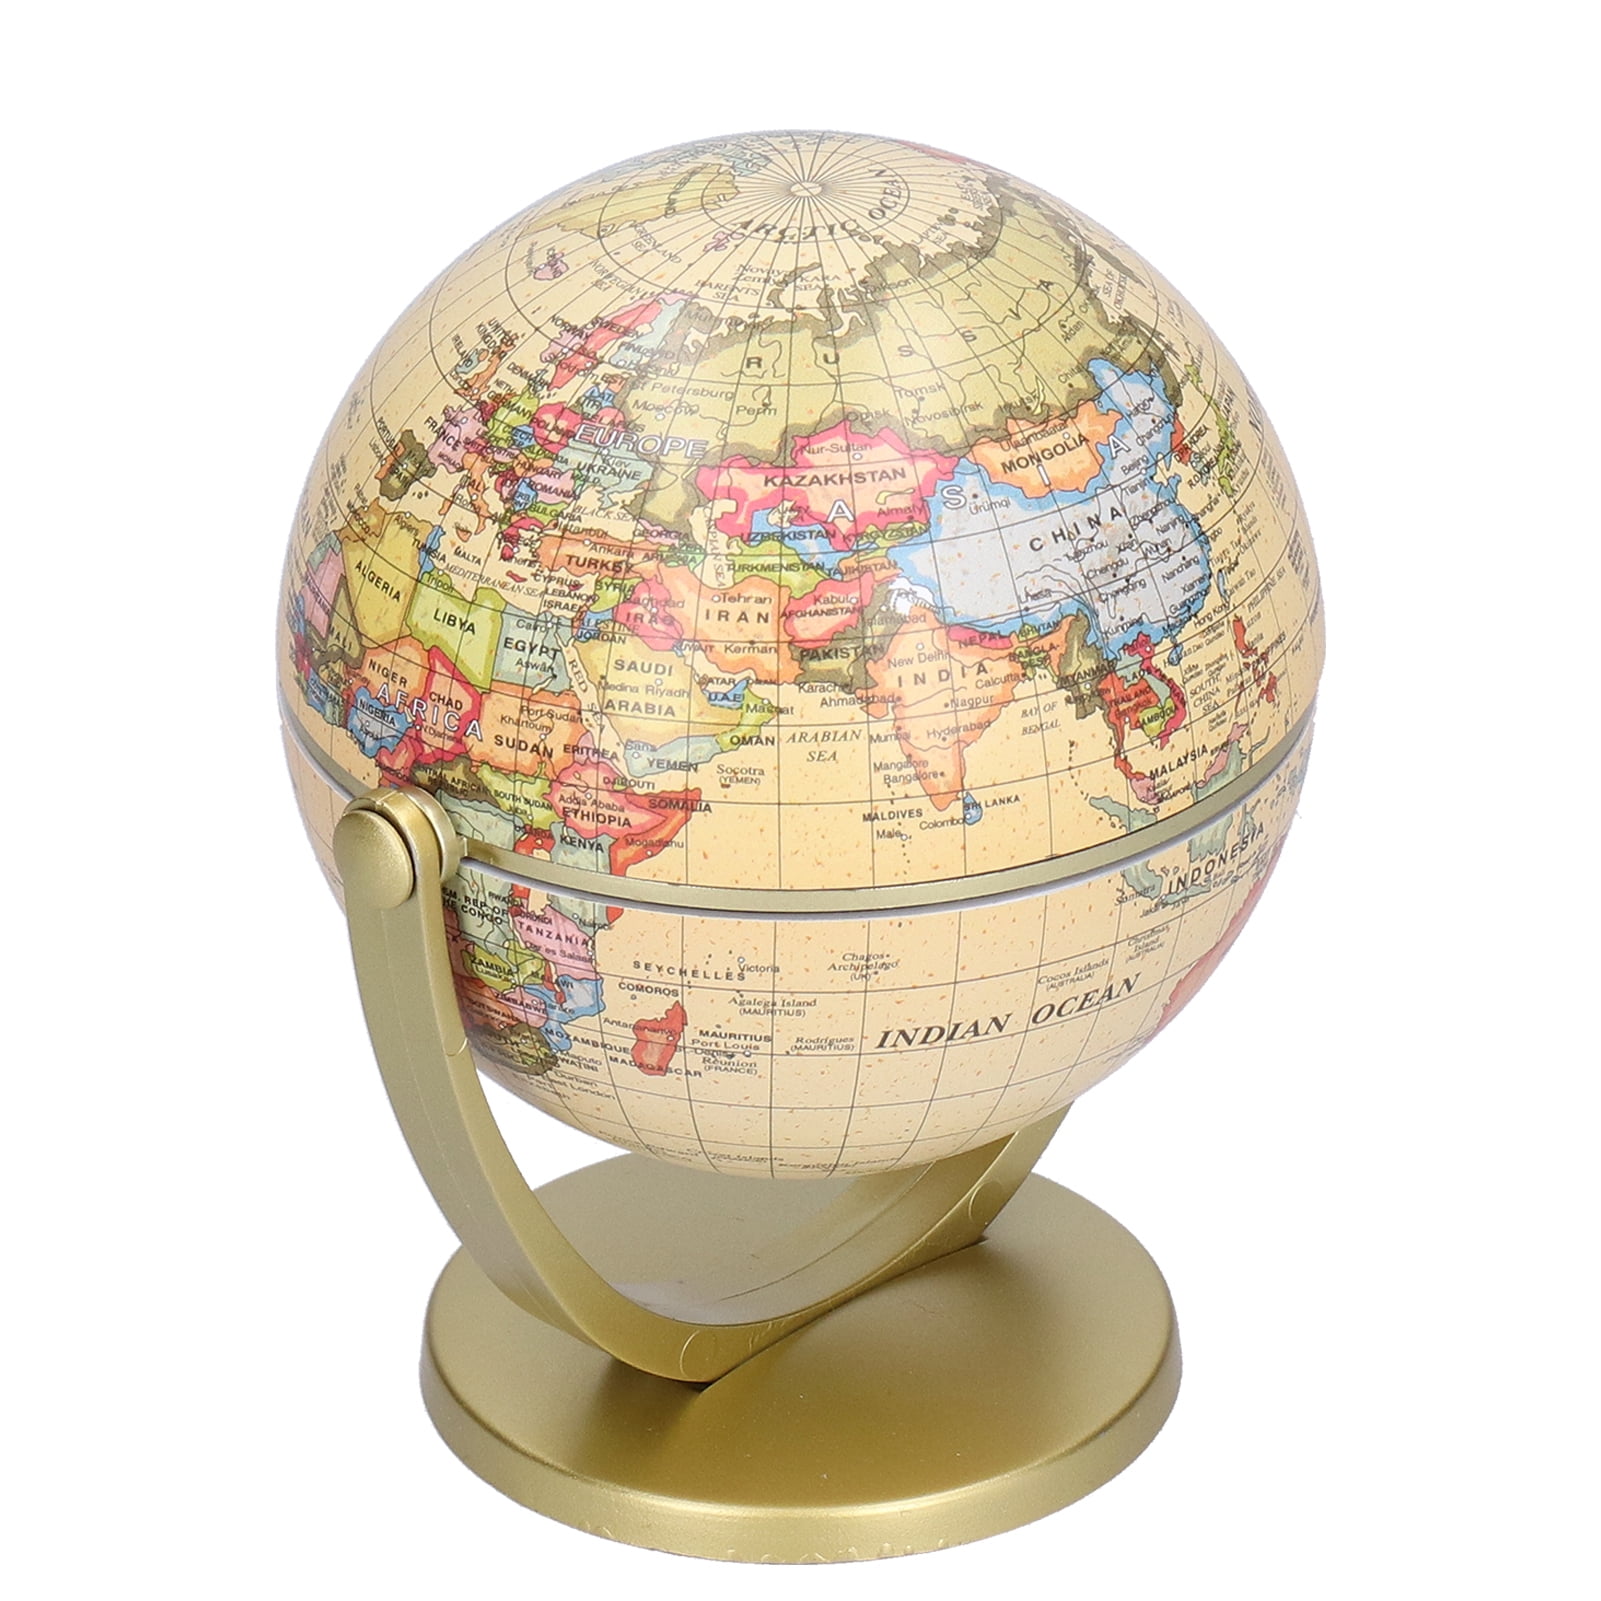  ANNOVA Metallic World Globe Black –  Educational/Geographic/Modern Desktop Decoration - Stainless Steel Arc and  Base/Earth World - Metallic Black - for School, Home, and Office (10-Inch)  : Toys & Games